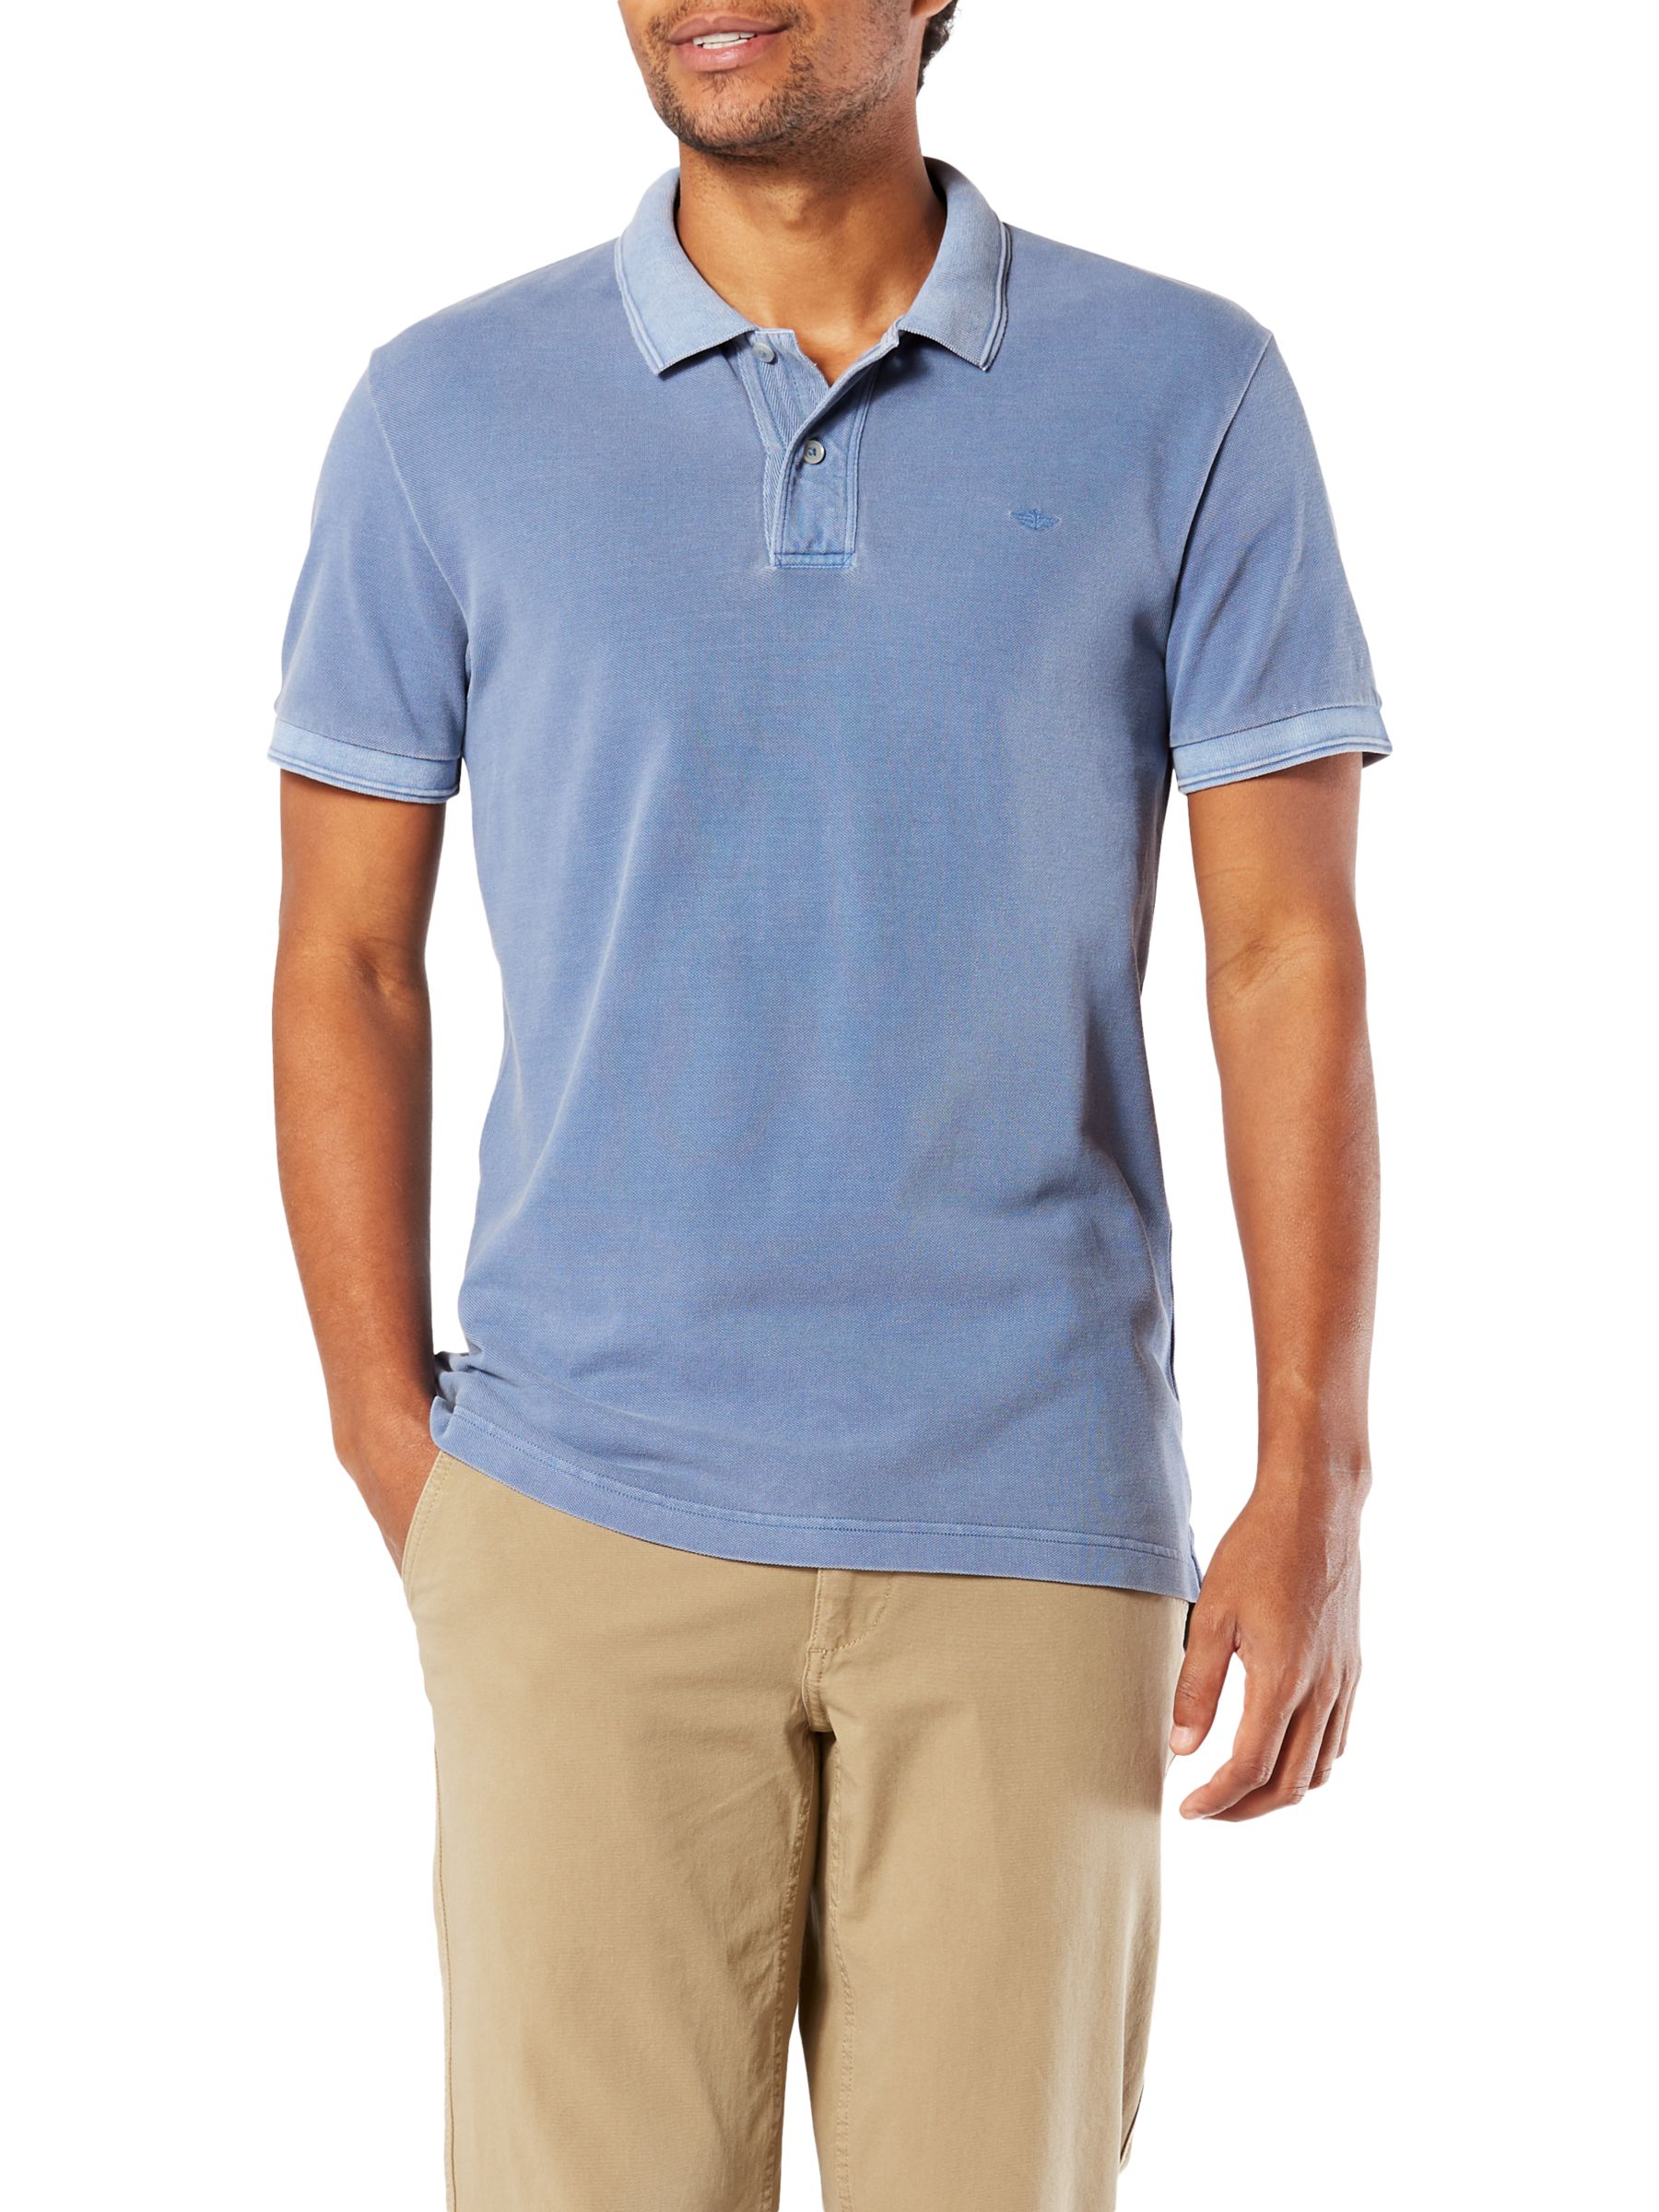 Dockers Garment Dyed Fitted Short Sleeve Polo Shirt